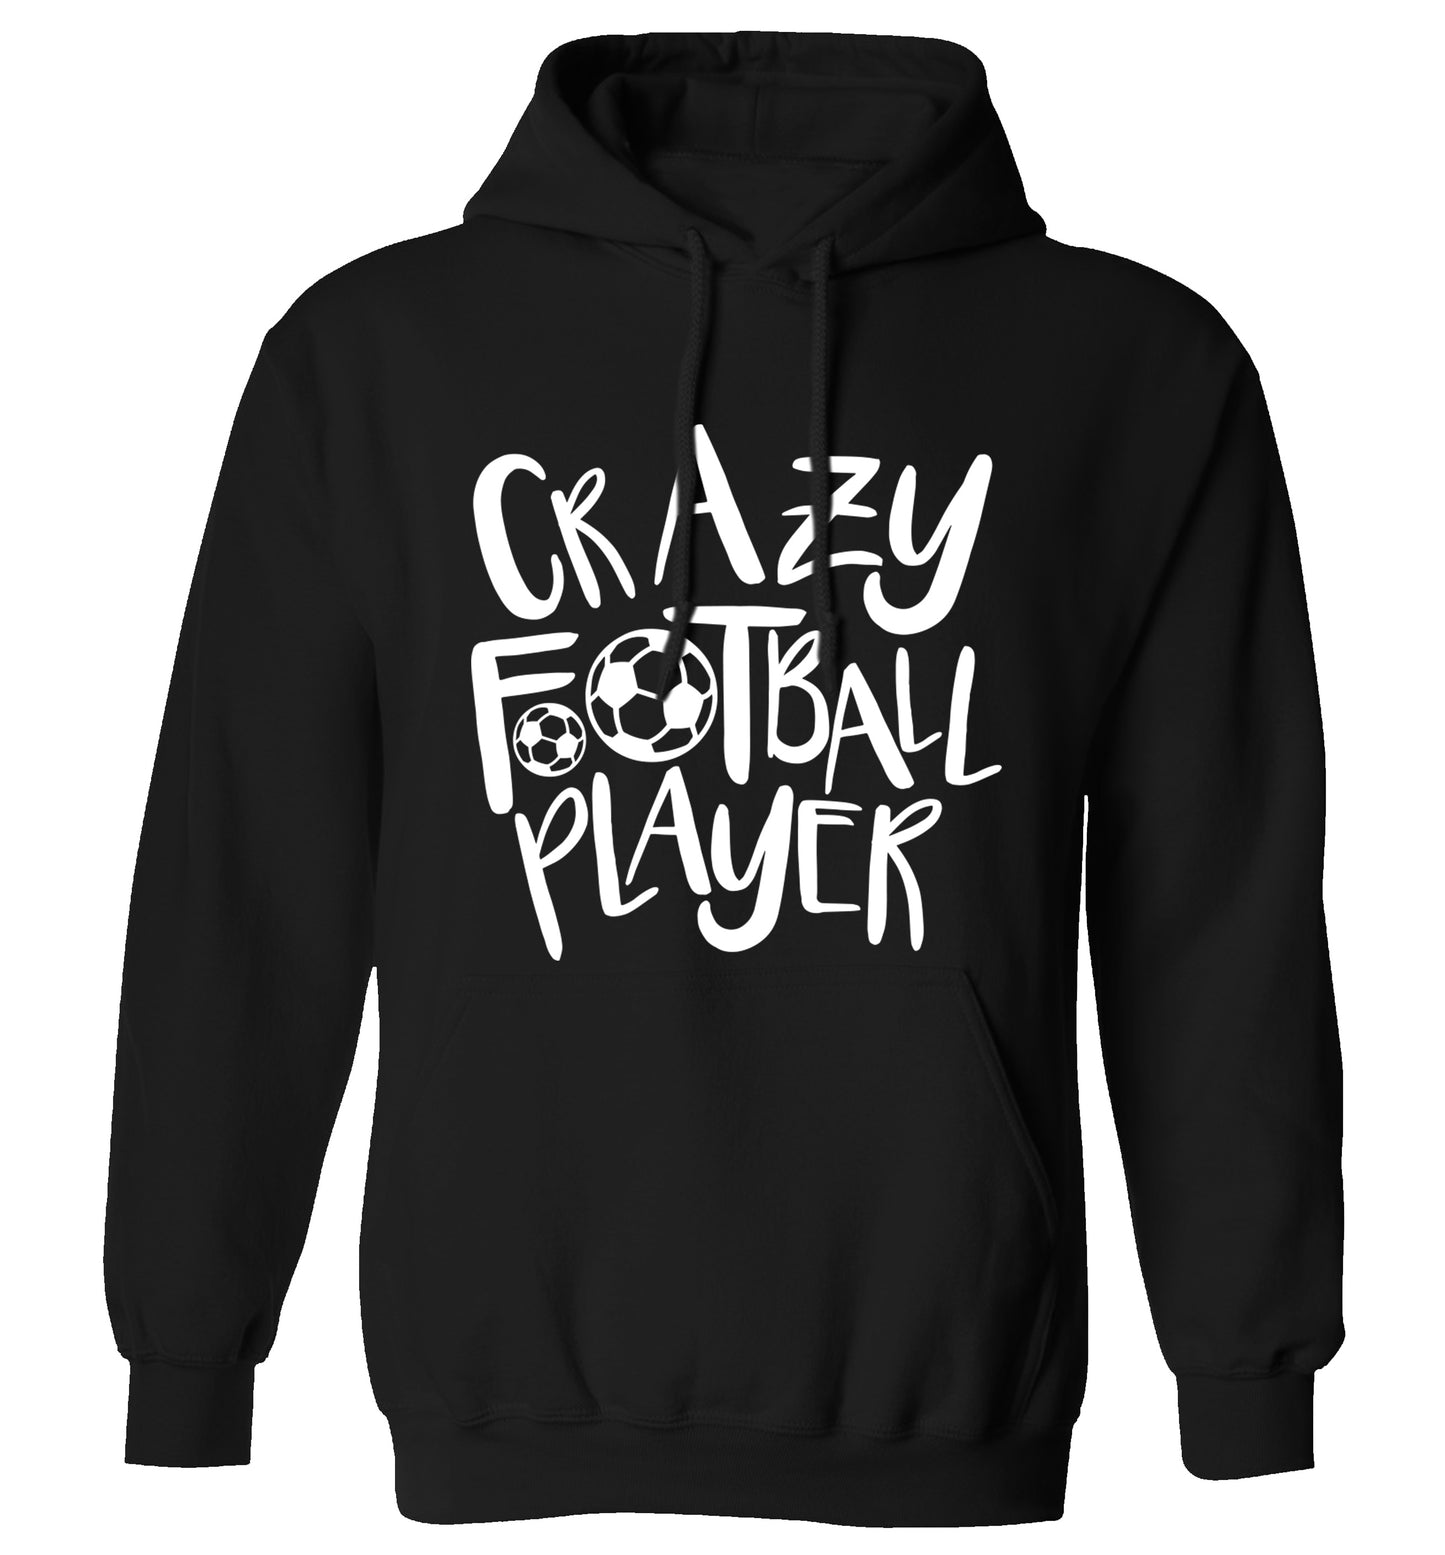 Crazy football player adults unisexblack hoodie 2XL